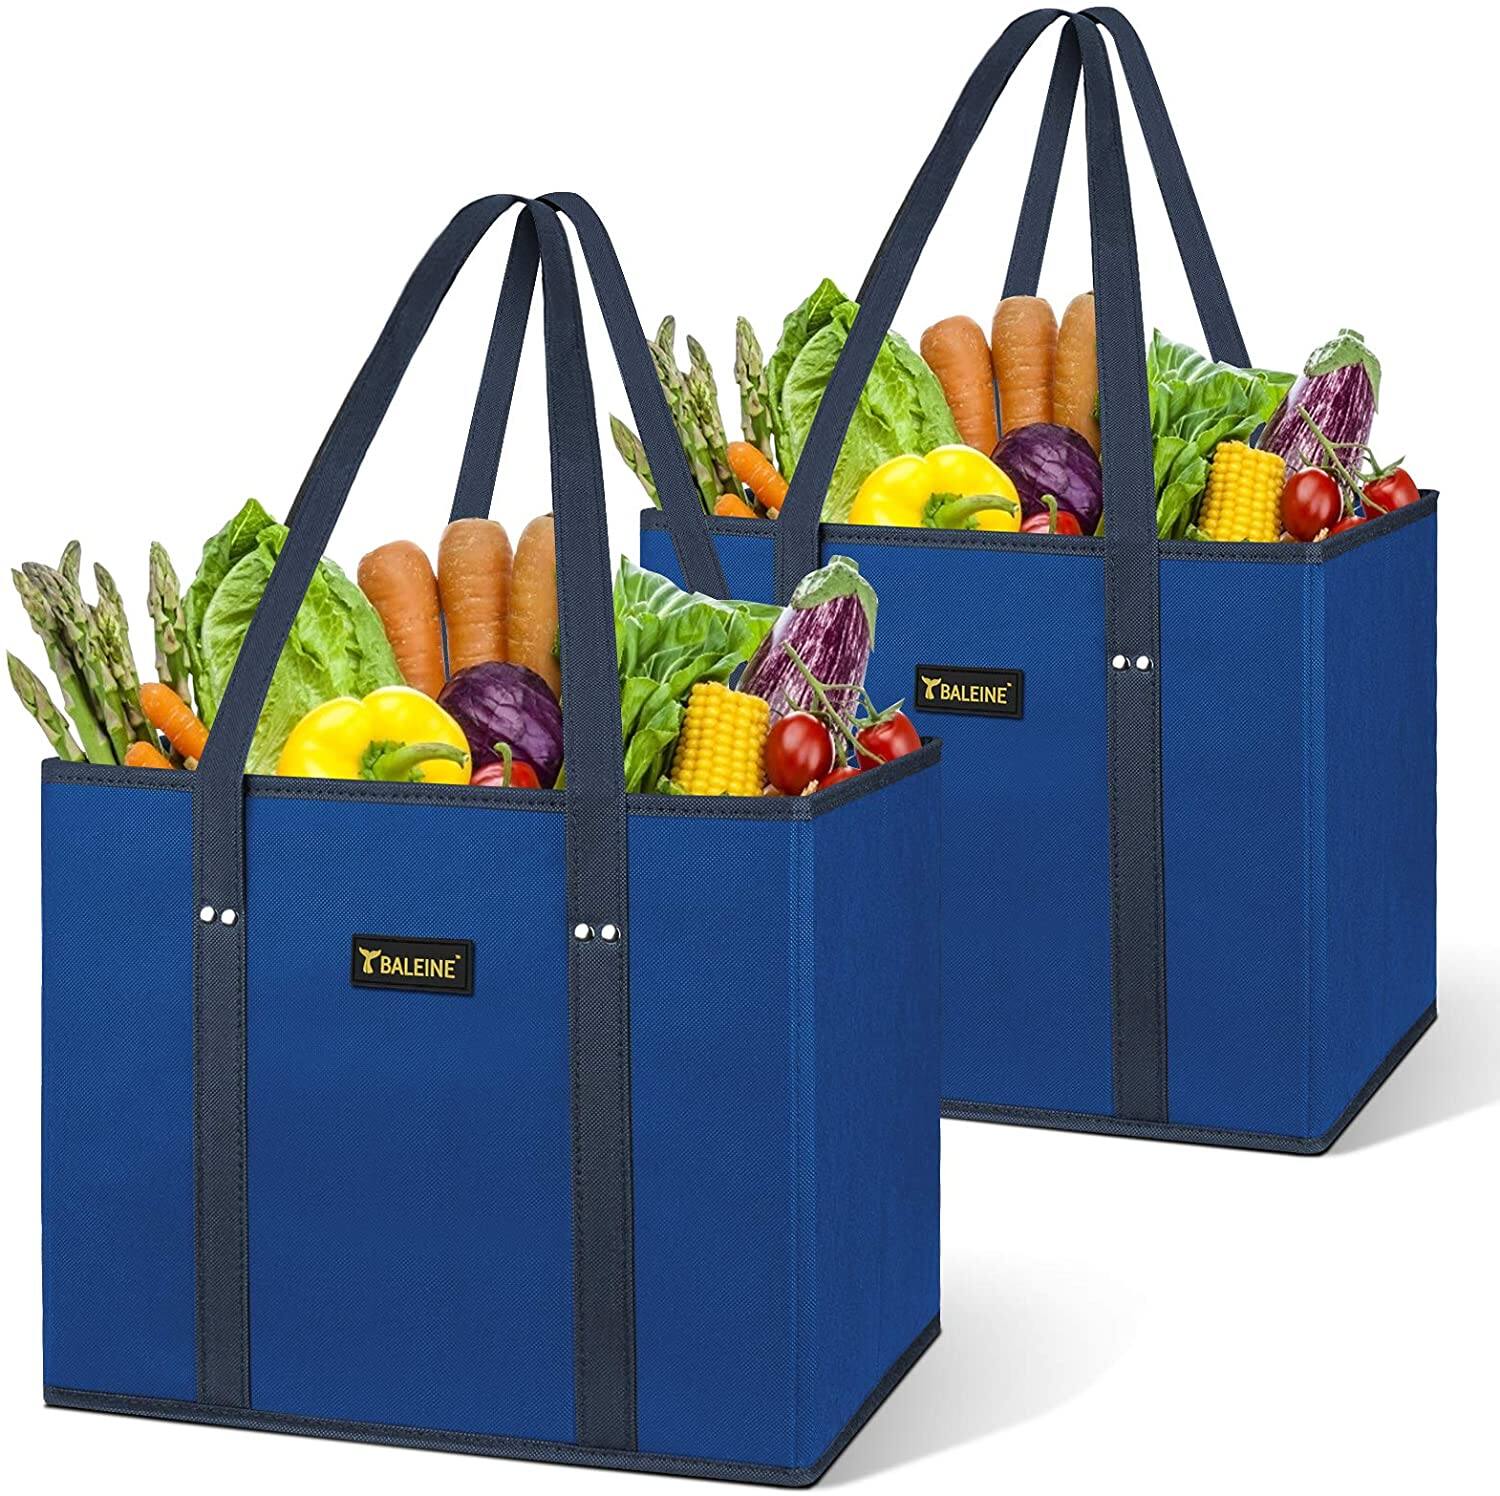 Reusable Shopping Bags with Reinforced Bottom and Handles $8.99 + Free Shipping w/ Amazon Prime or Orders $25+ $13.5